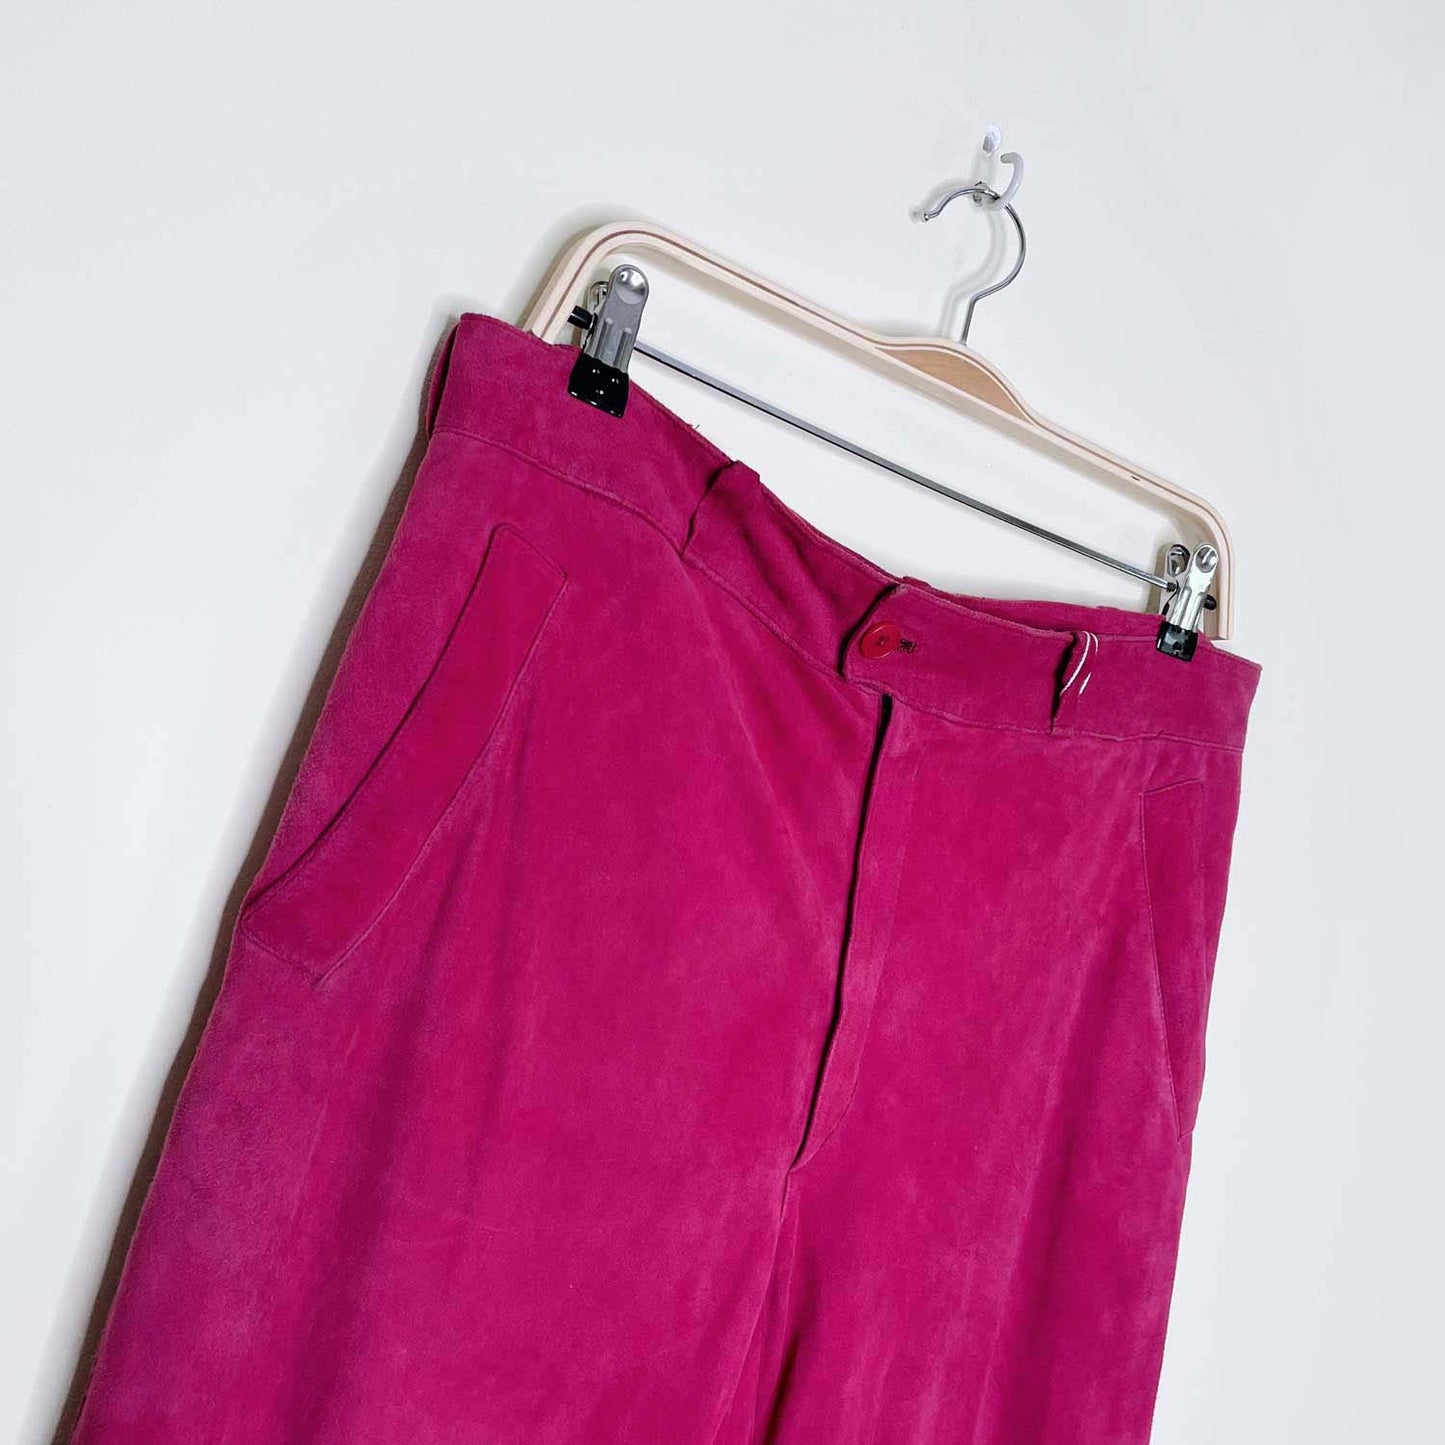 vintage 80s gianni versace pink suede pants - size 34